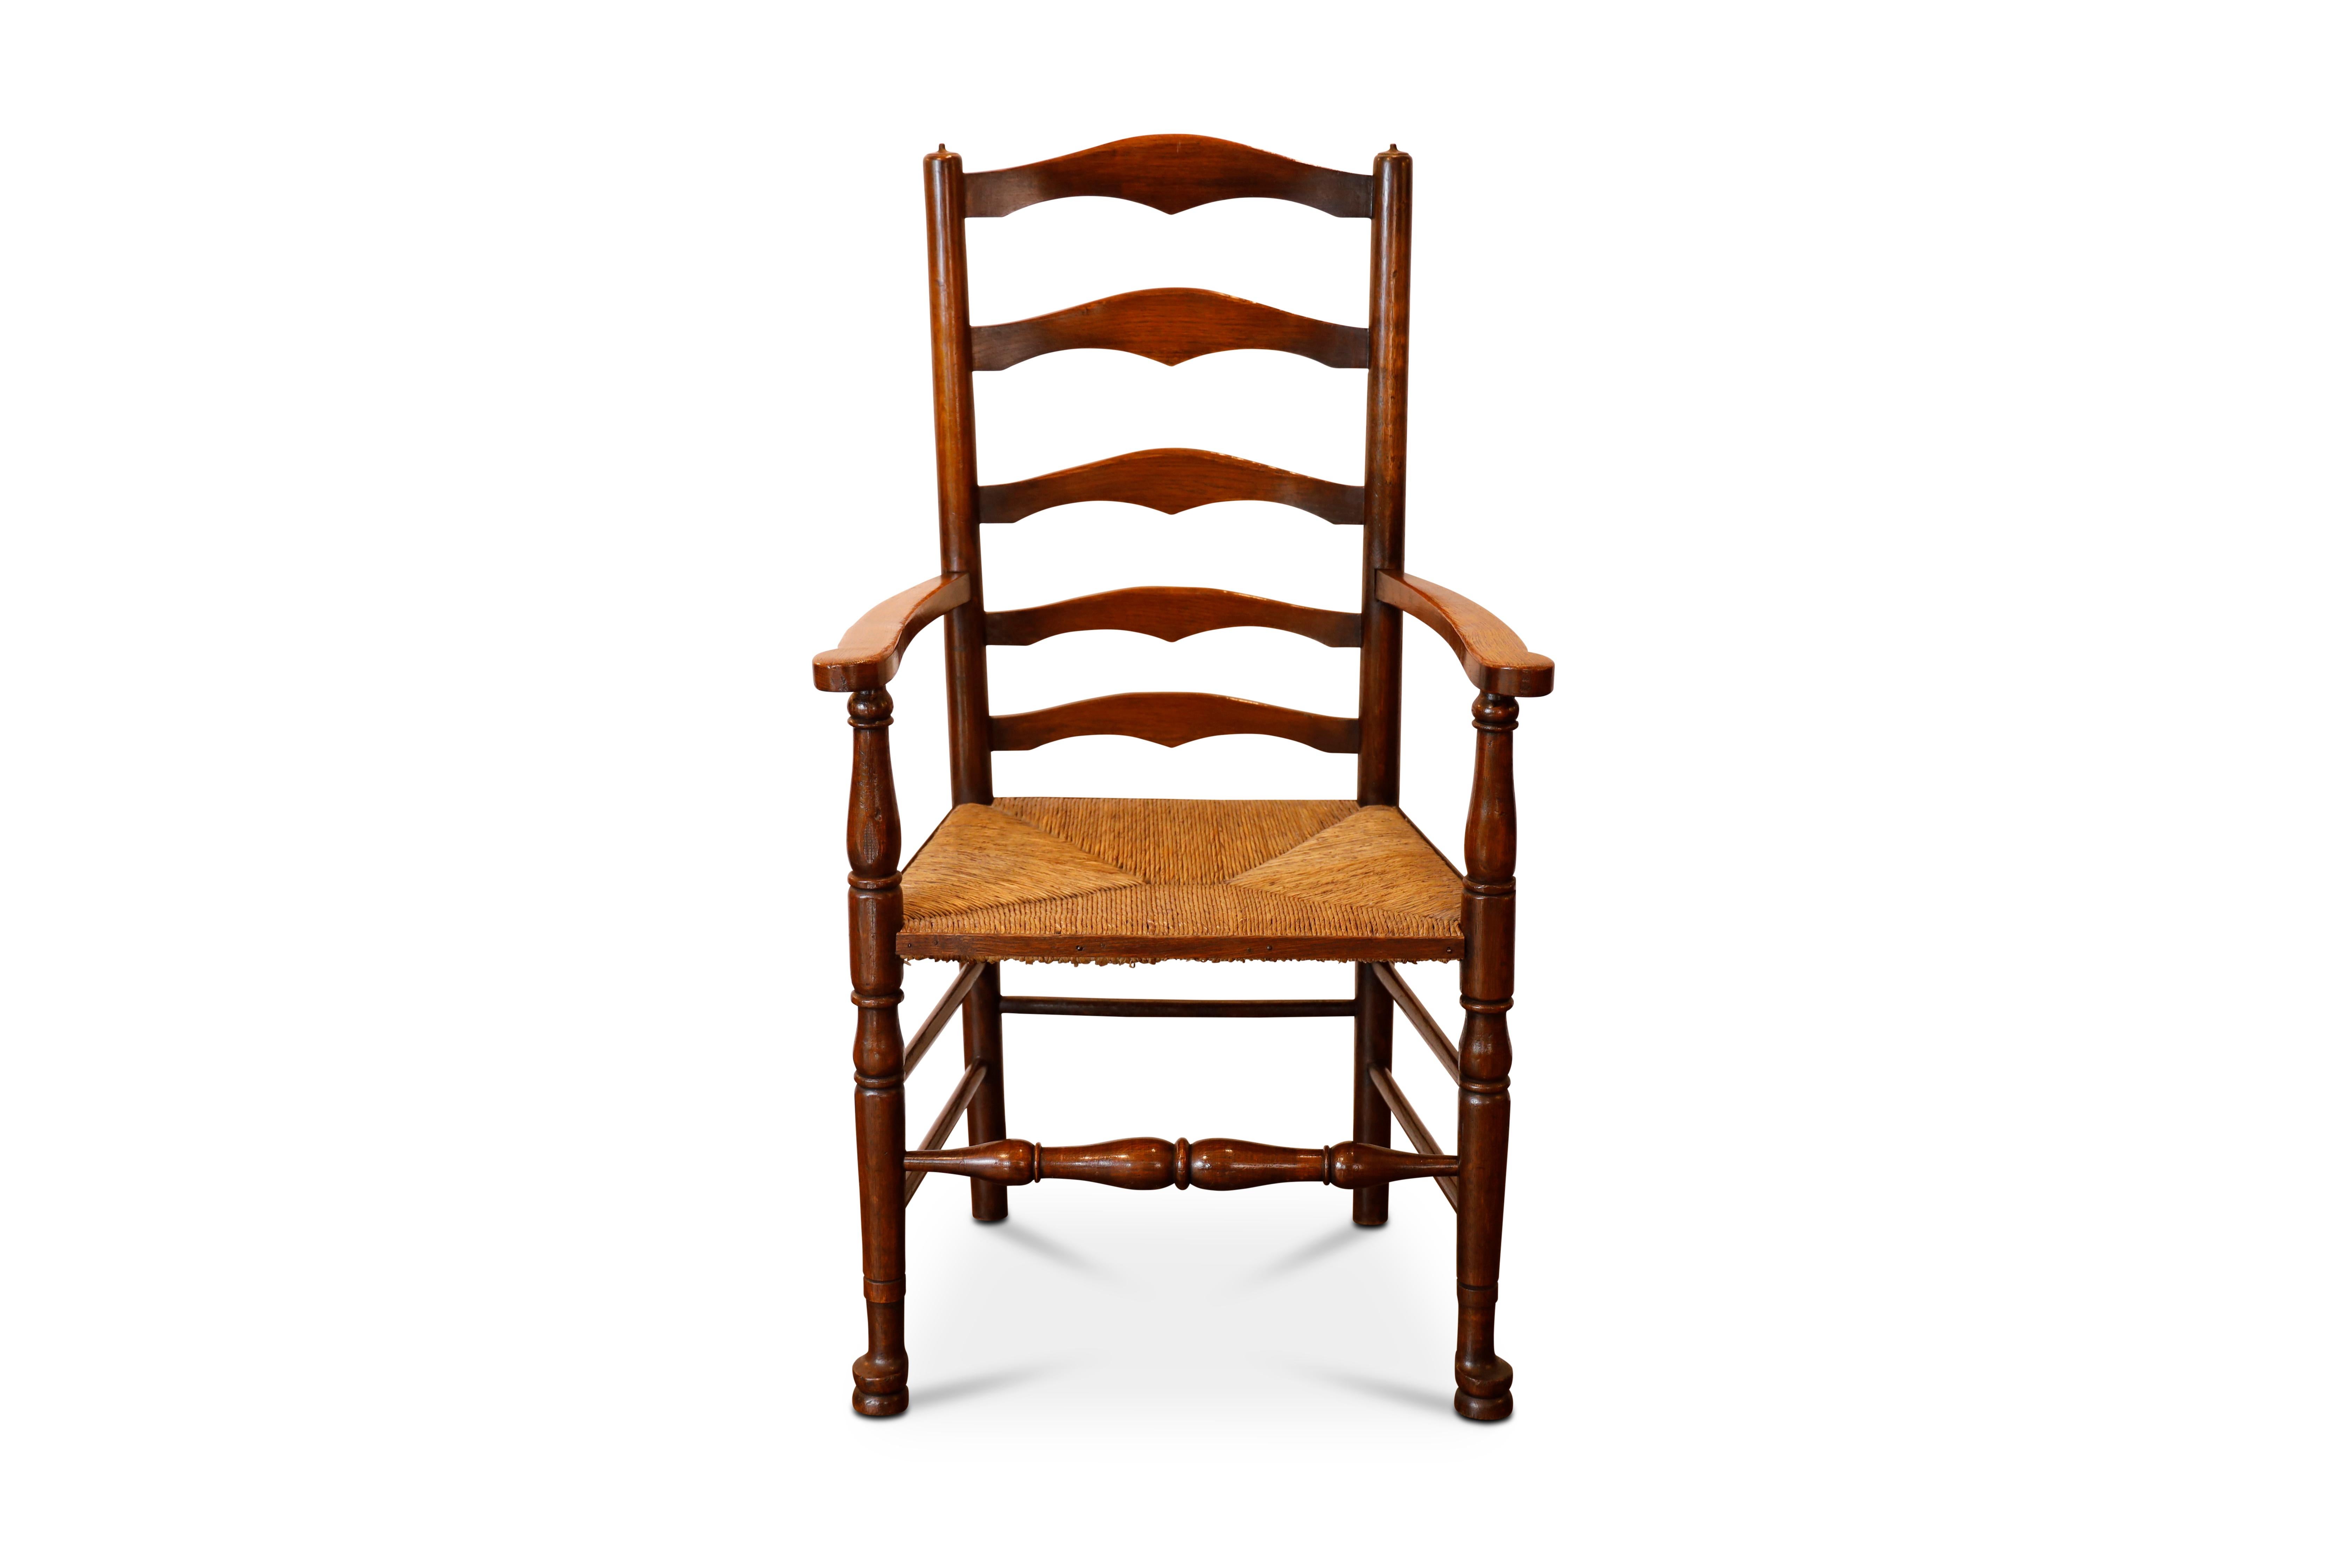 Victorian English Ladder Back Chairs For Sale